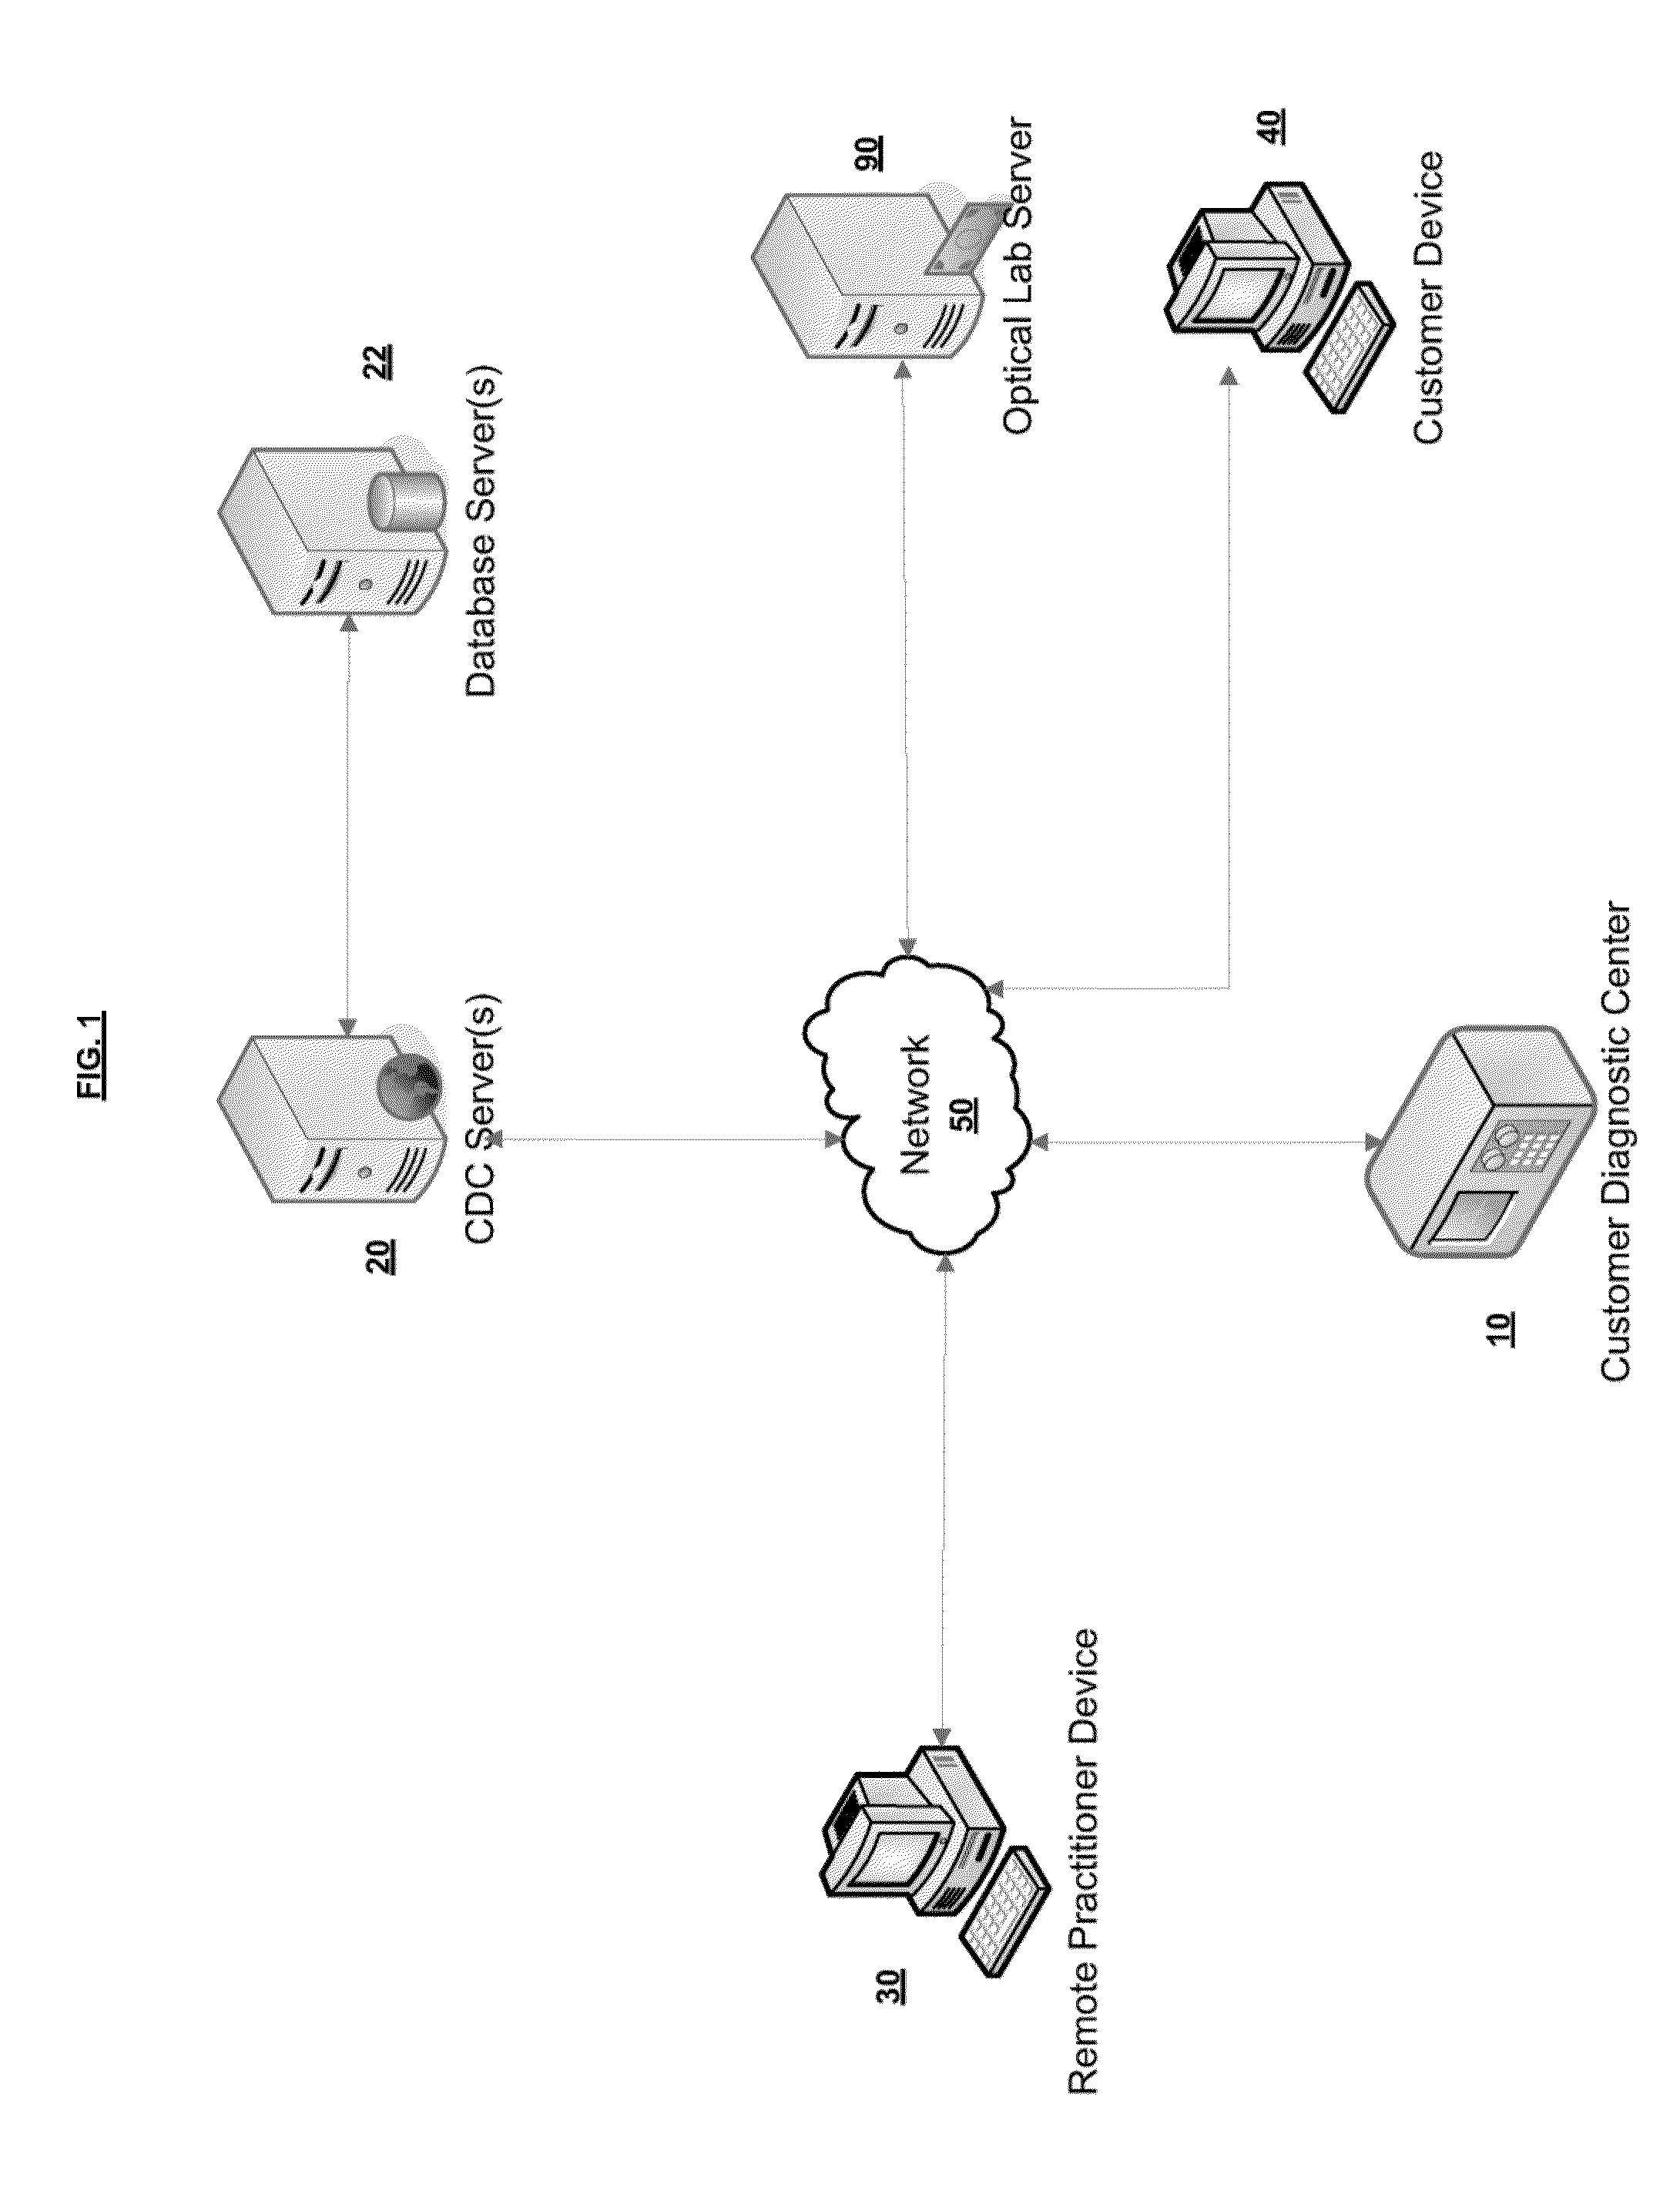 Systems and methods for enabling customers to obtain vision and eye health examinations